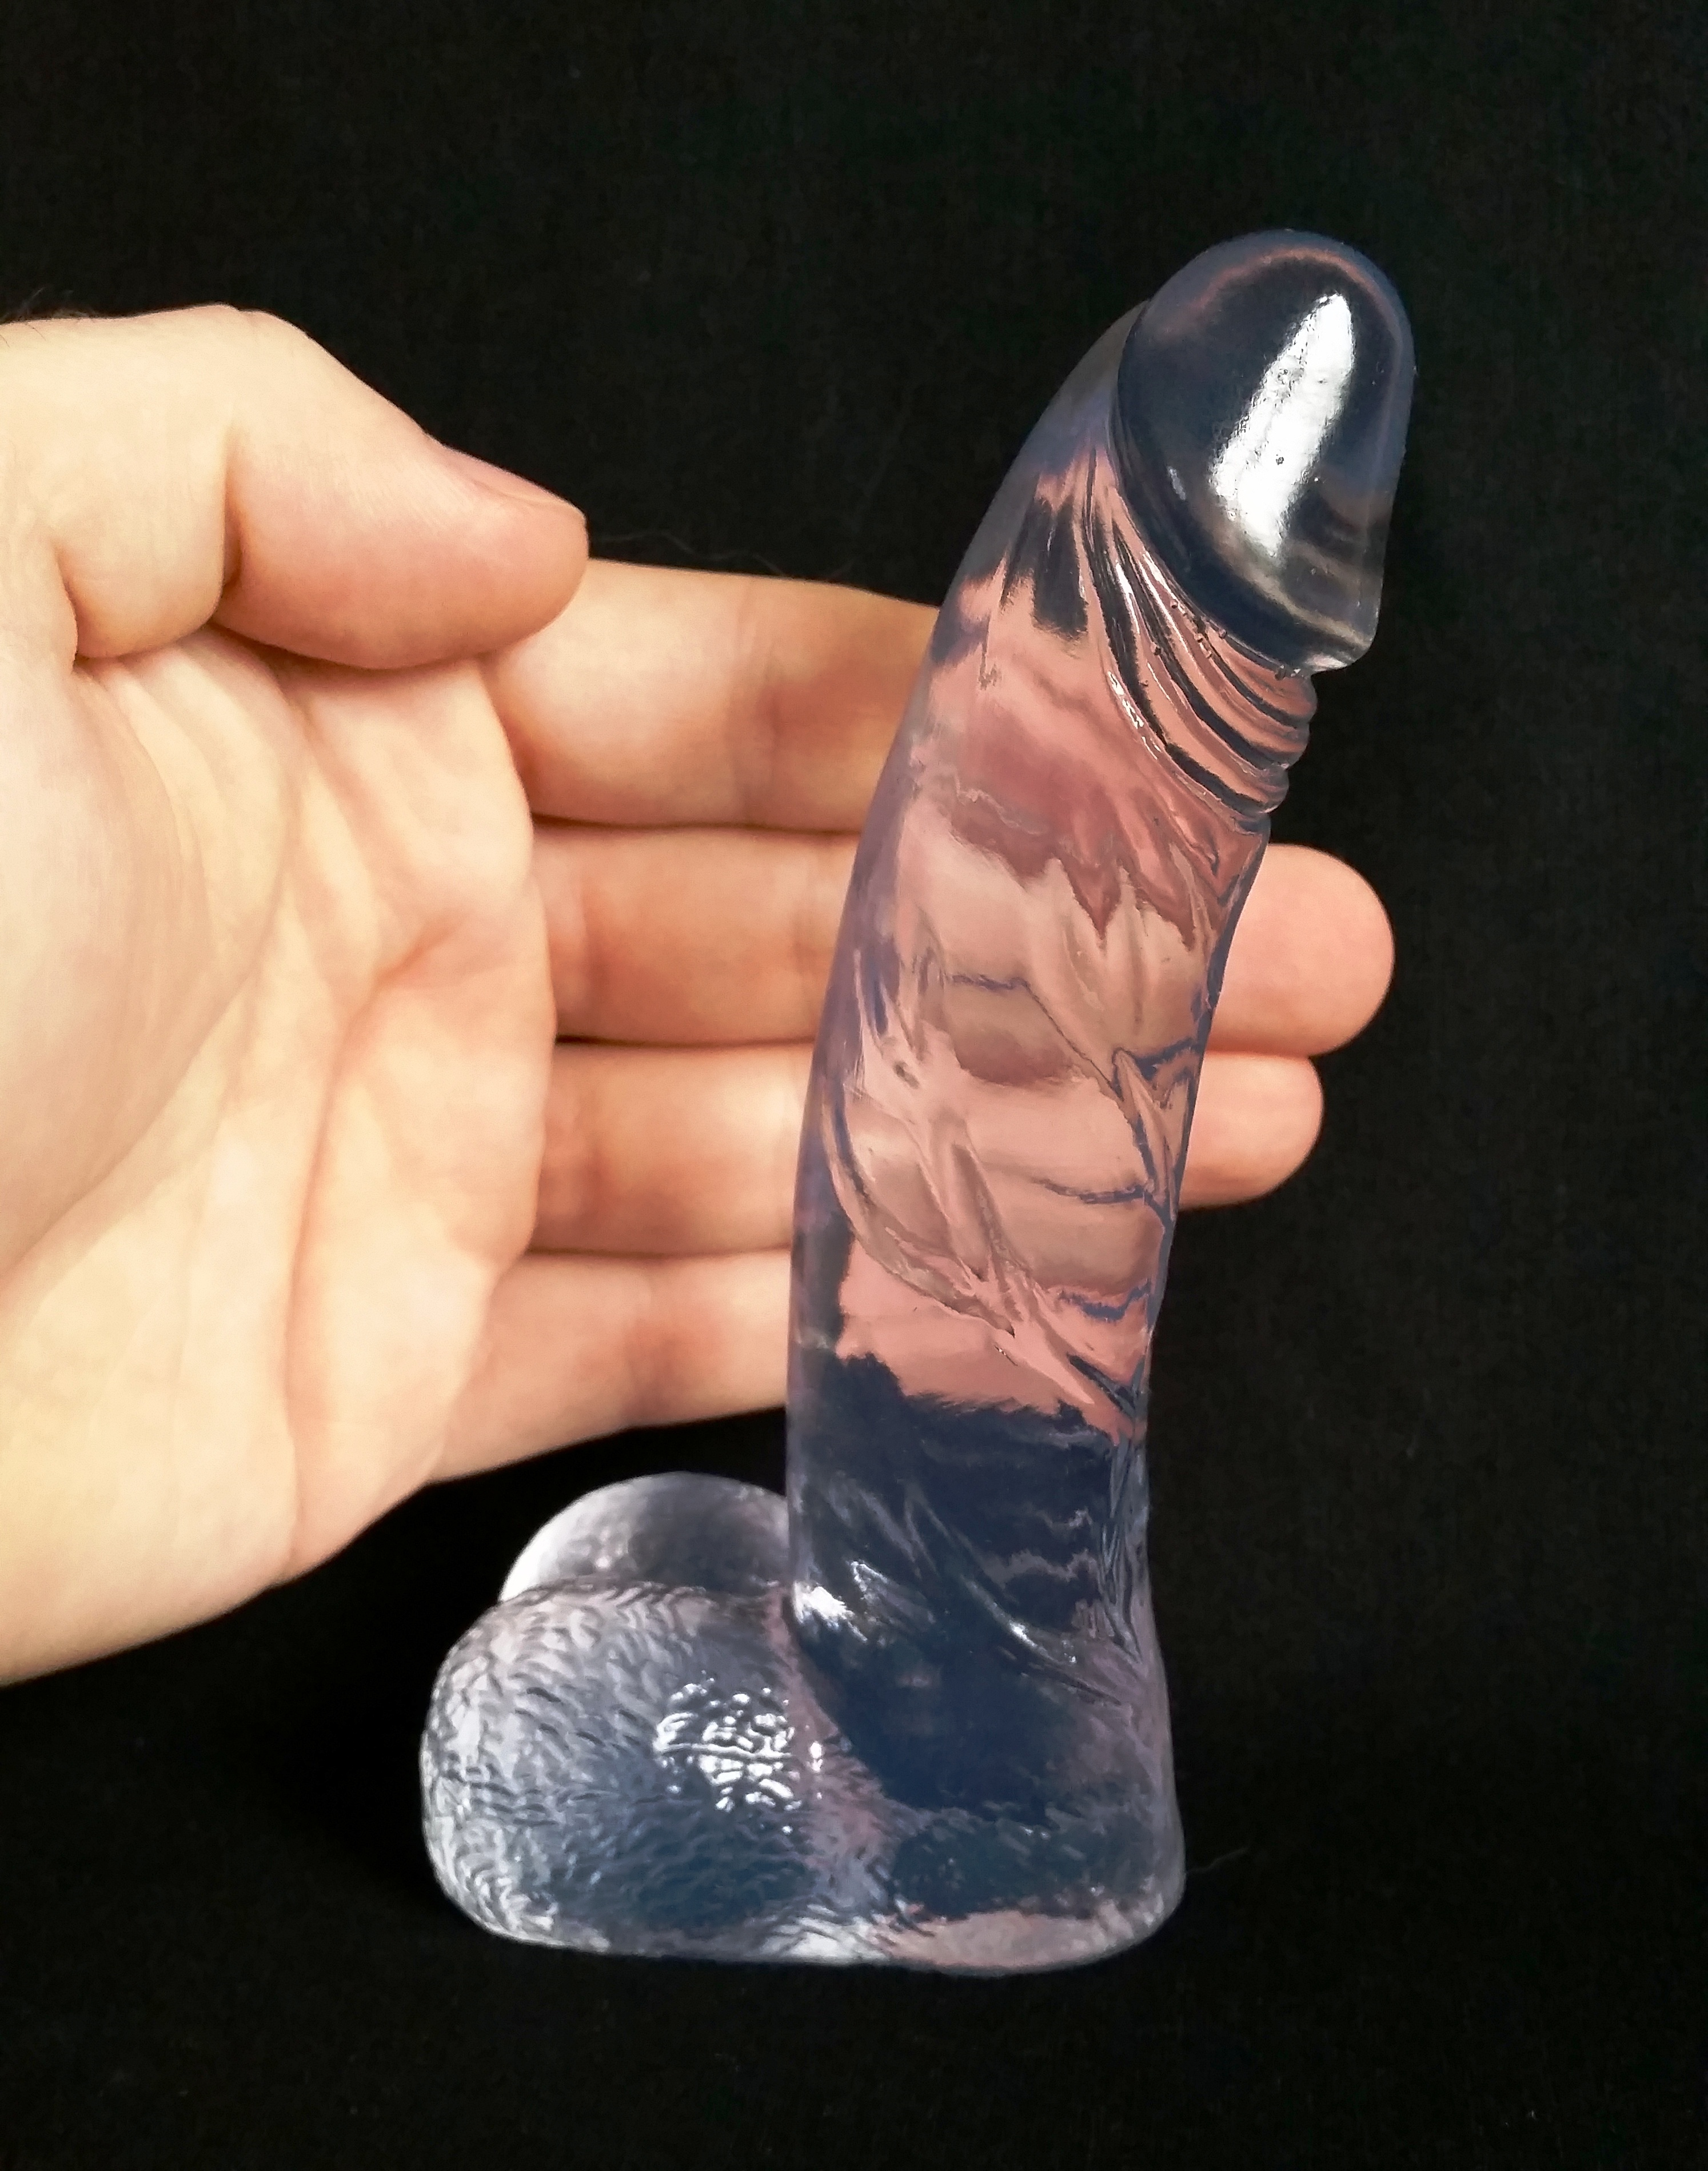 Difference between jelly and rubber dildo